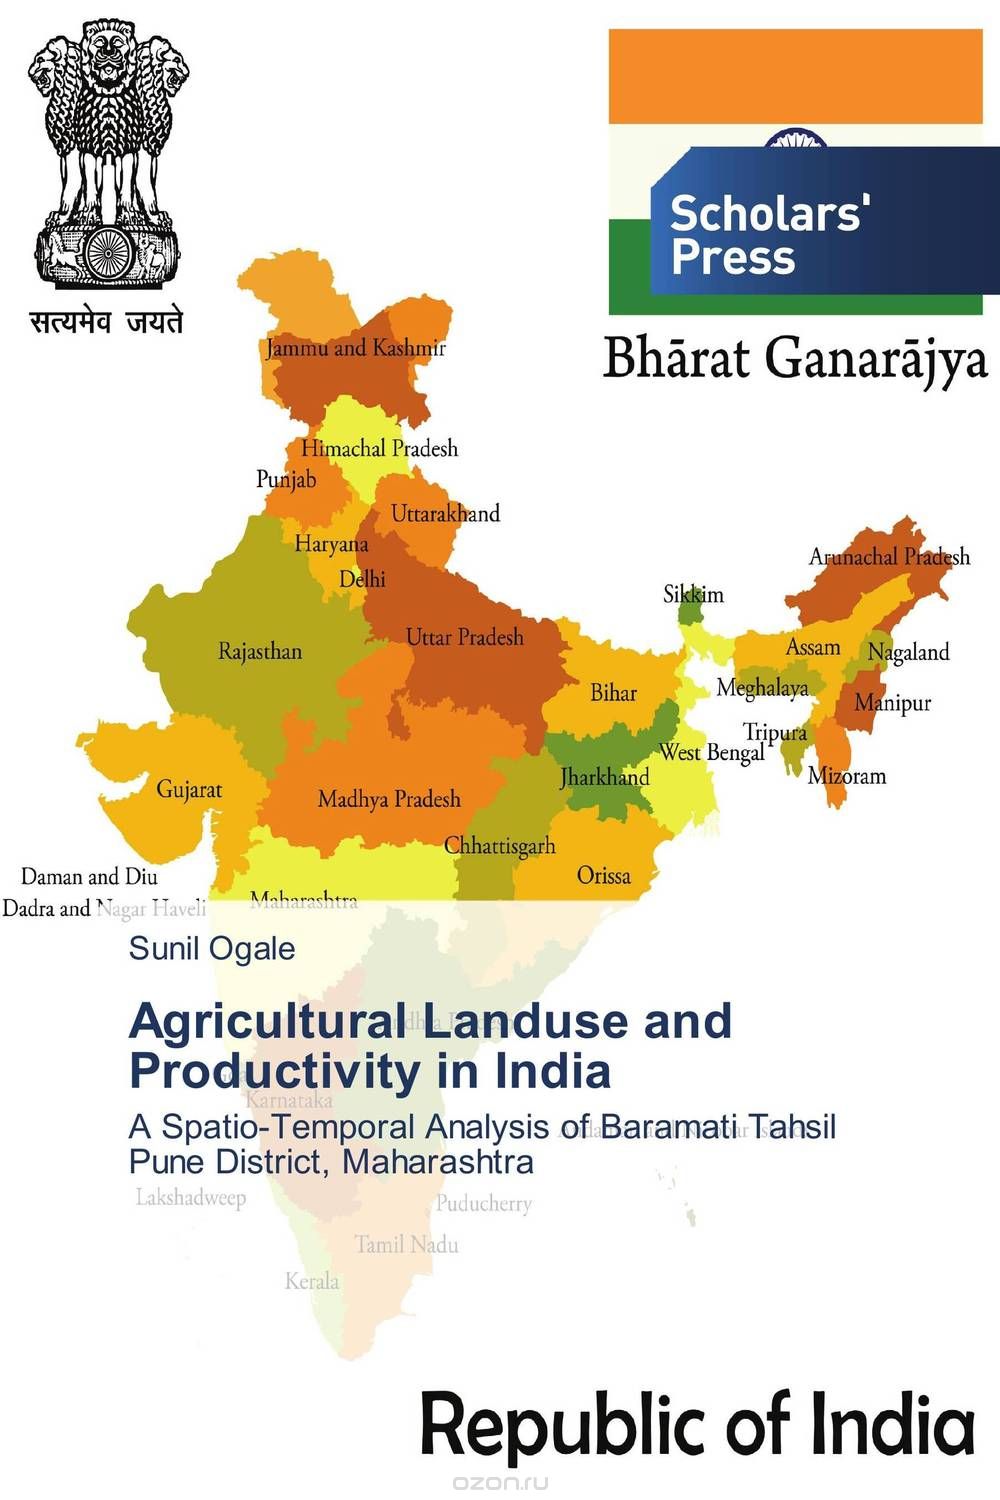 Скачать книгу "Agricultural Landuse and Productivity in India"